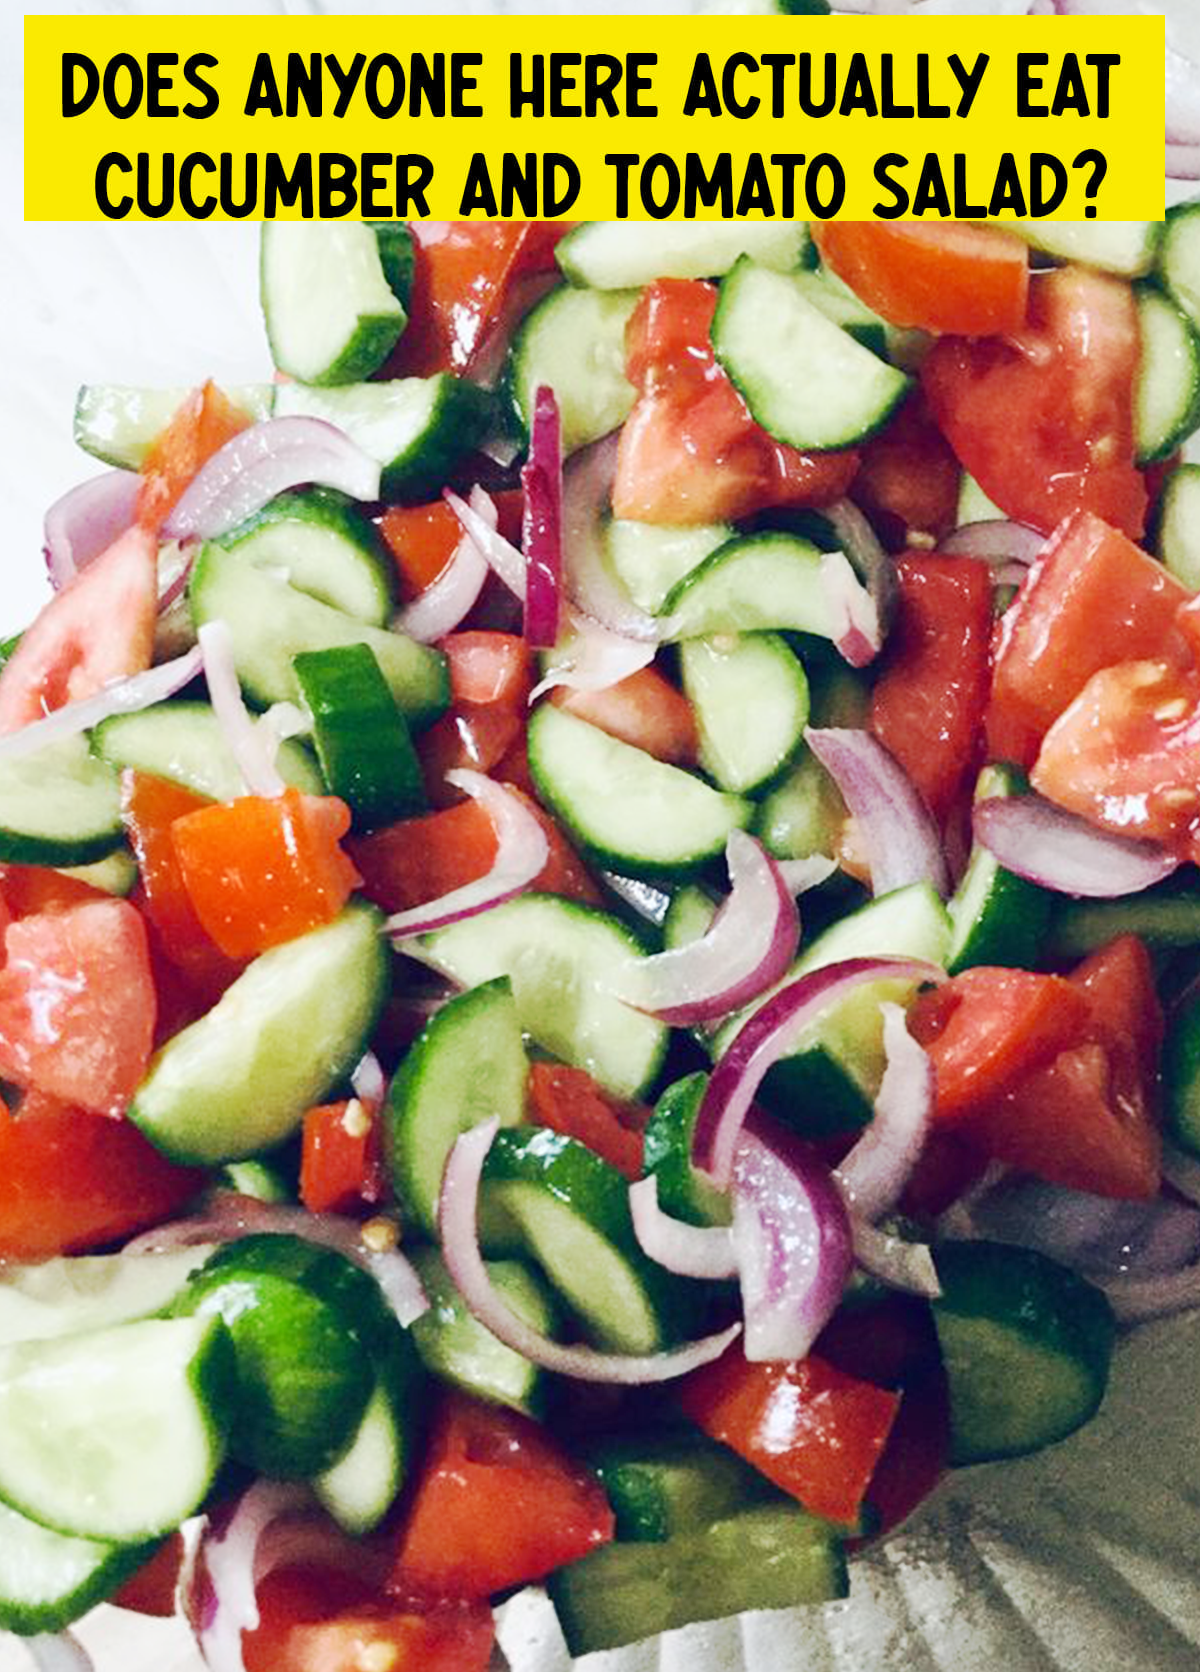 CUCUMBER AND TOMATO SALAD Search results